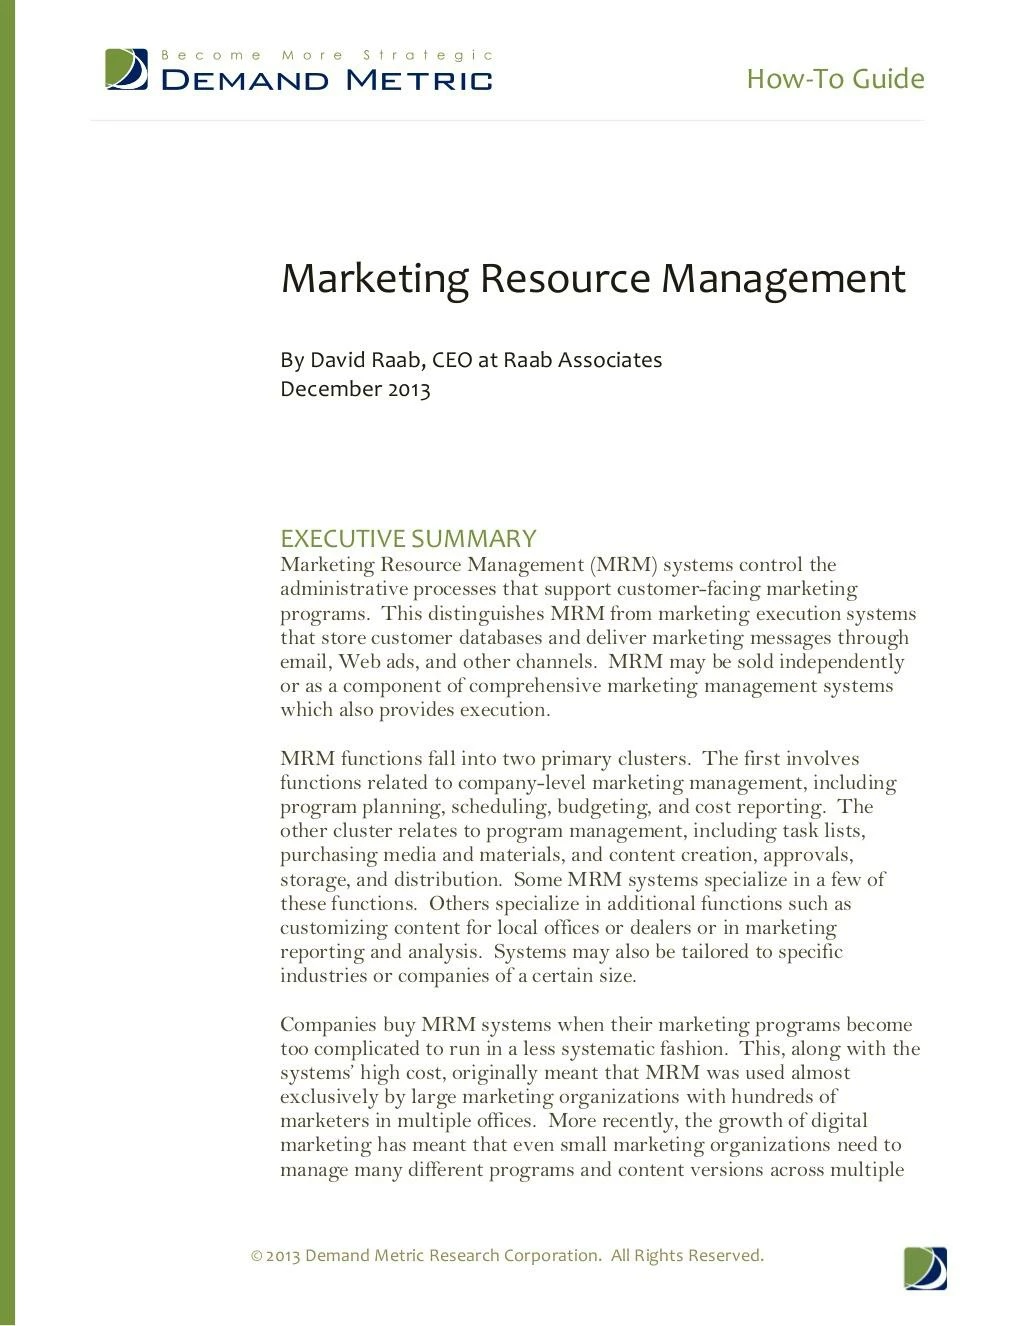 how to guide marketing resource management